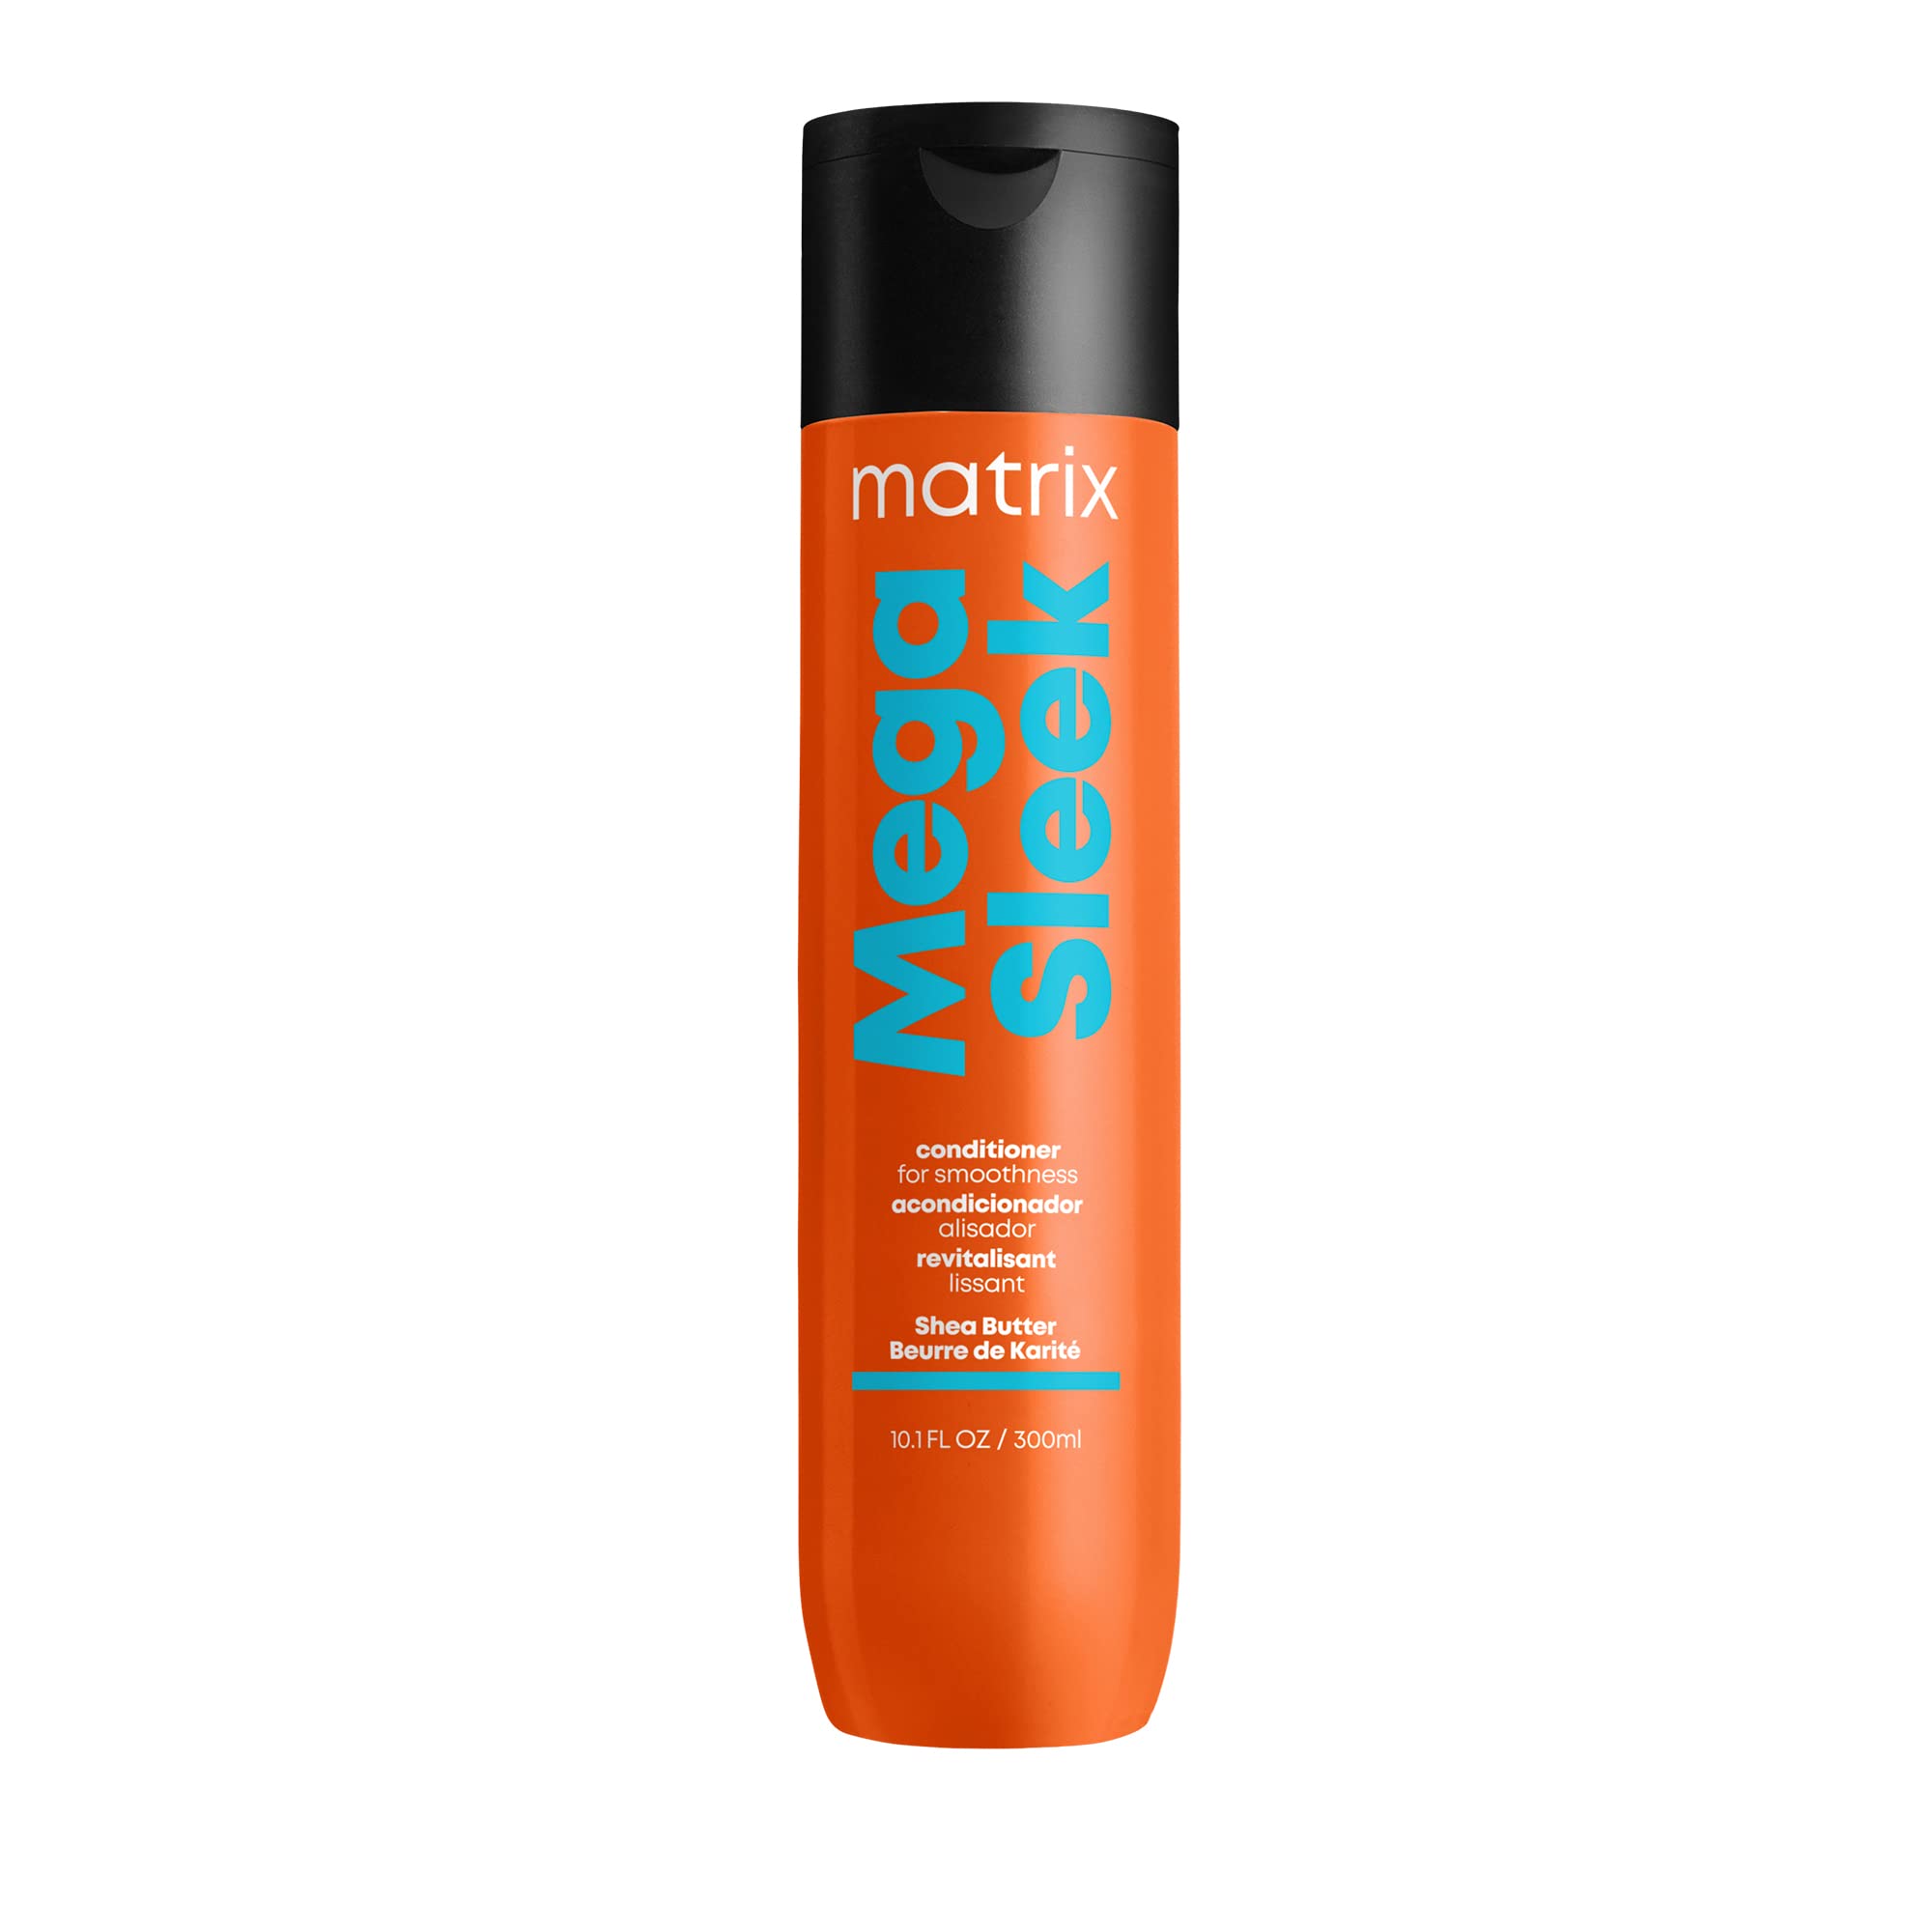 Matrix Mega Sleek Conditioner | Controls Frizz Leaving Hair Smooth & Shiny | Nourishes With Shea Butter | For Dry, Damaged Hair | Salon Professional Conditioner | Packaging May Vary